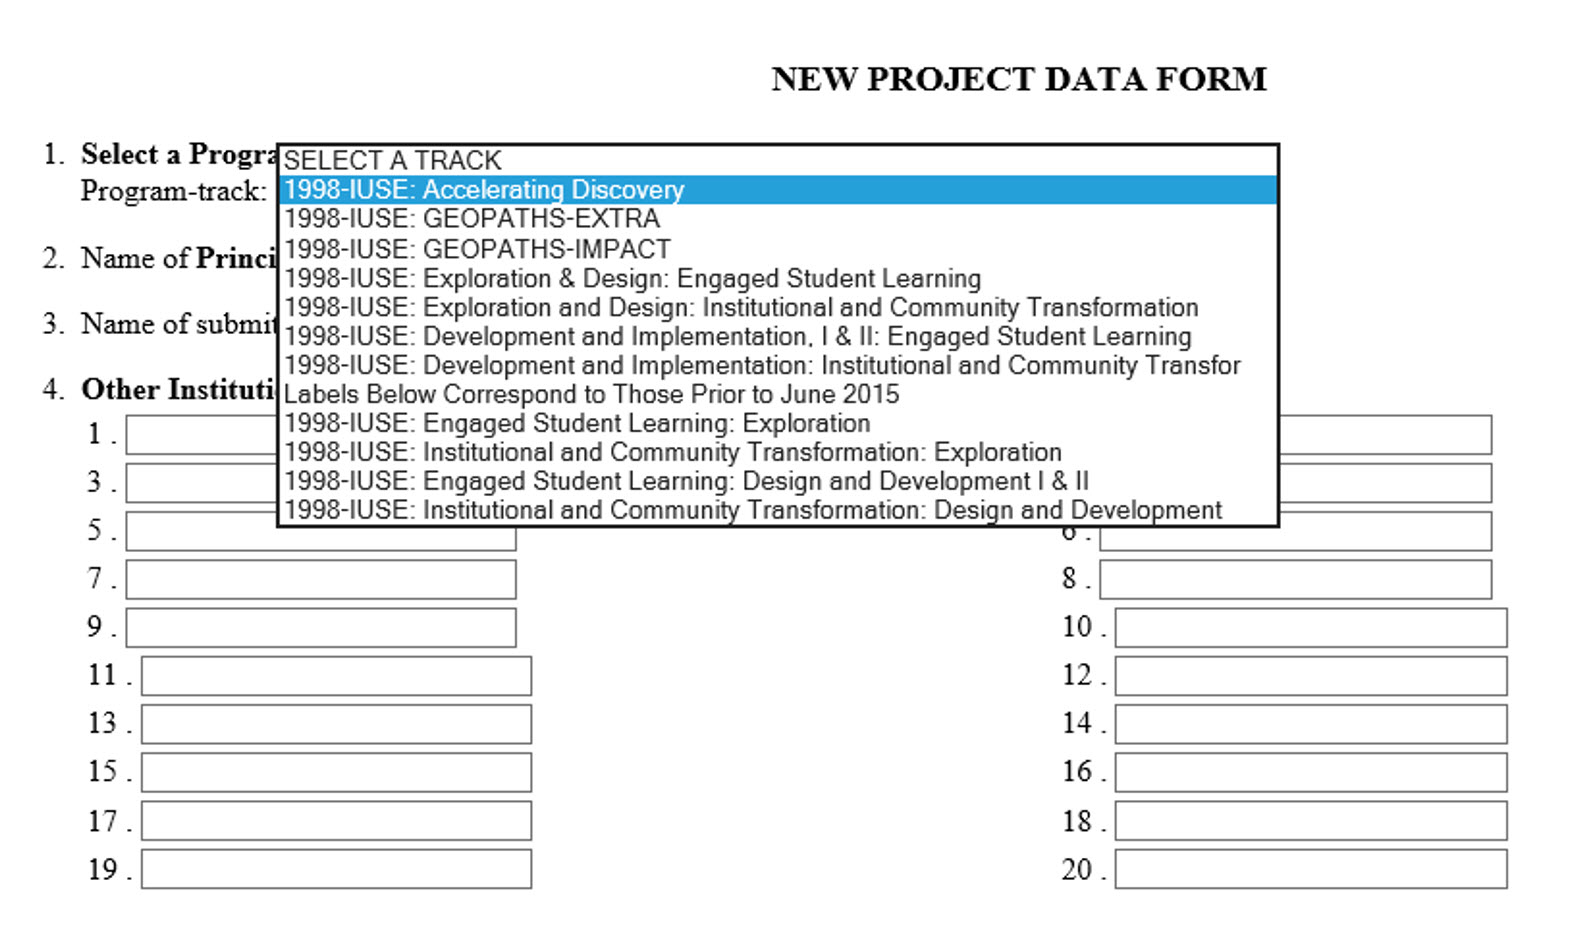 New Project Data Form - User selecting Accelerating Discovery from the Project Data Form drop-down menu